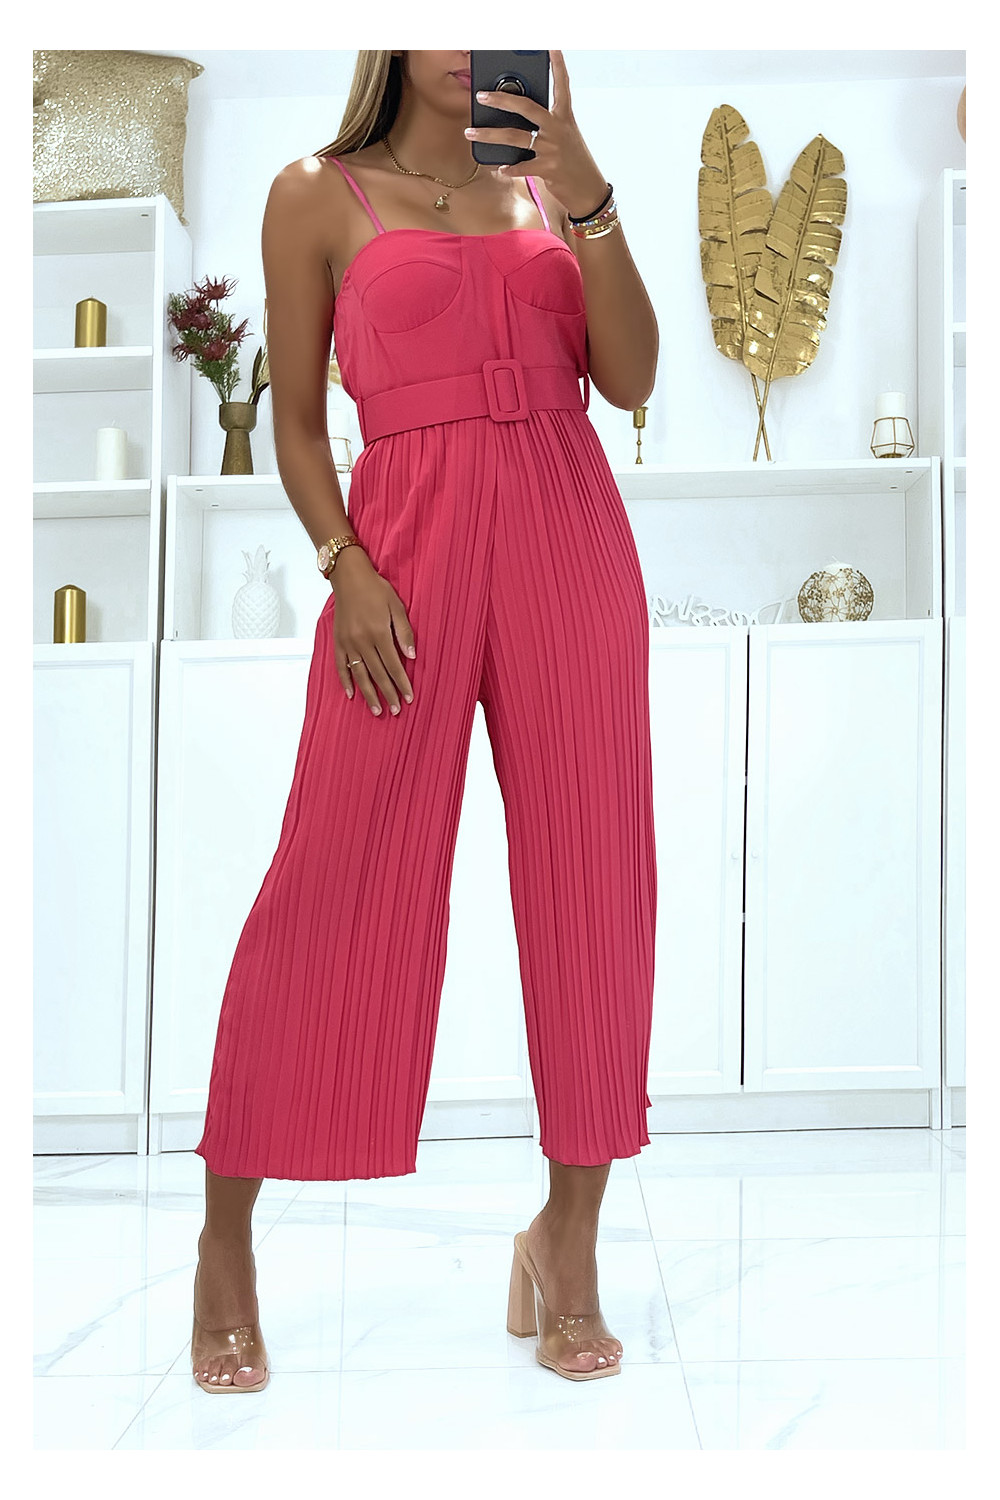 pedaal Rijk Aas Fuchsia pleated sleeveless bustier-effect voile jumpsuit with belts